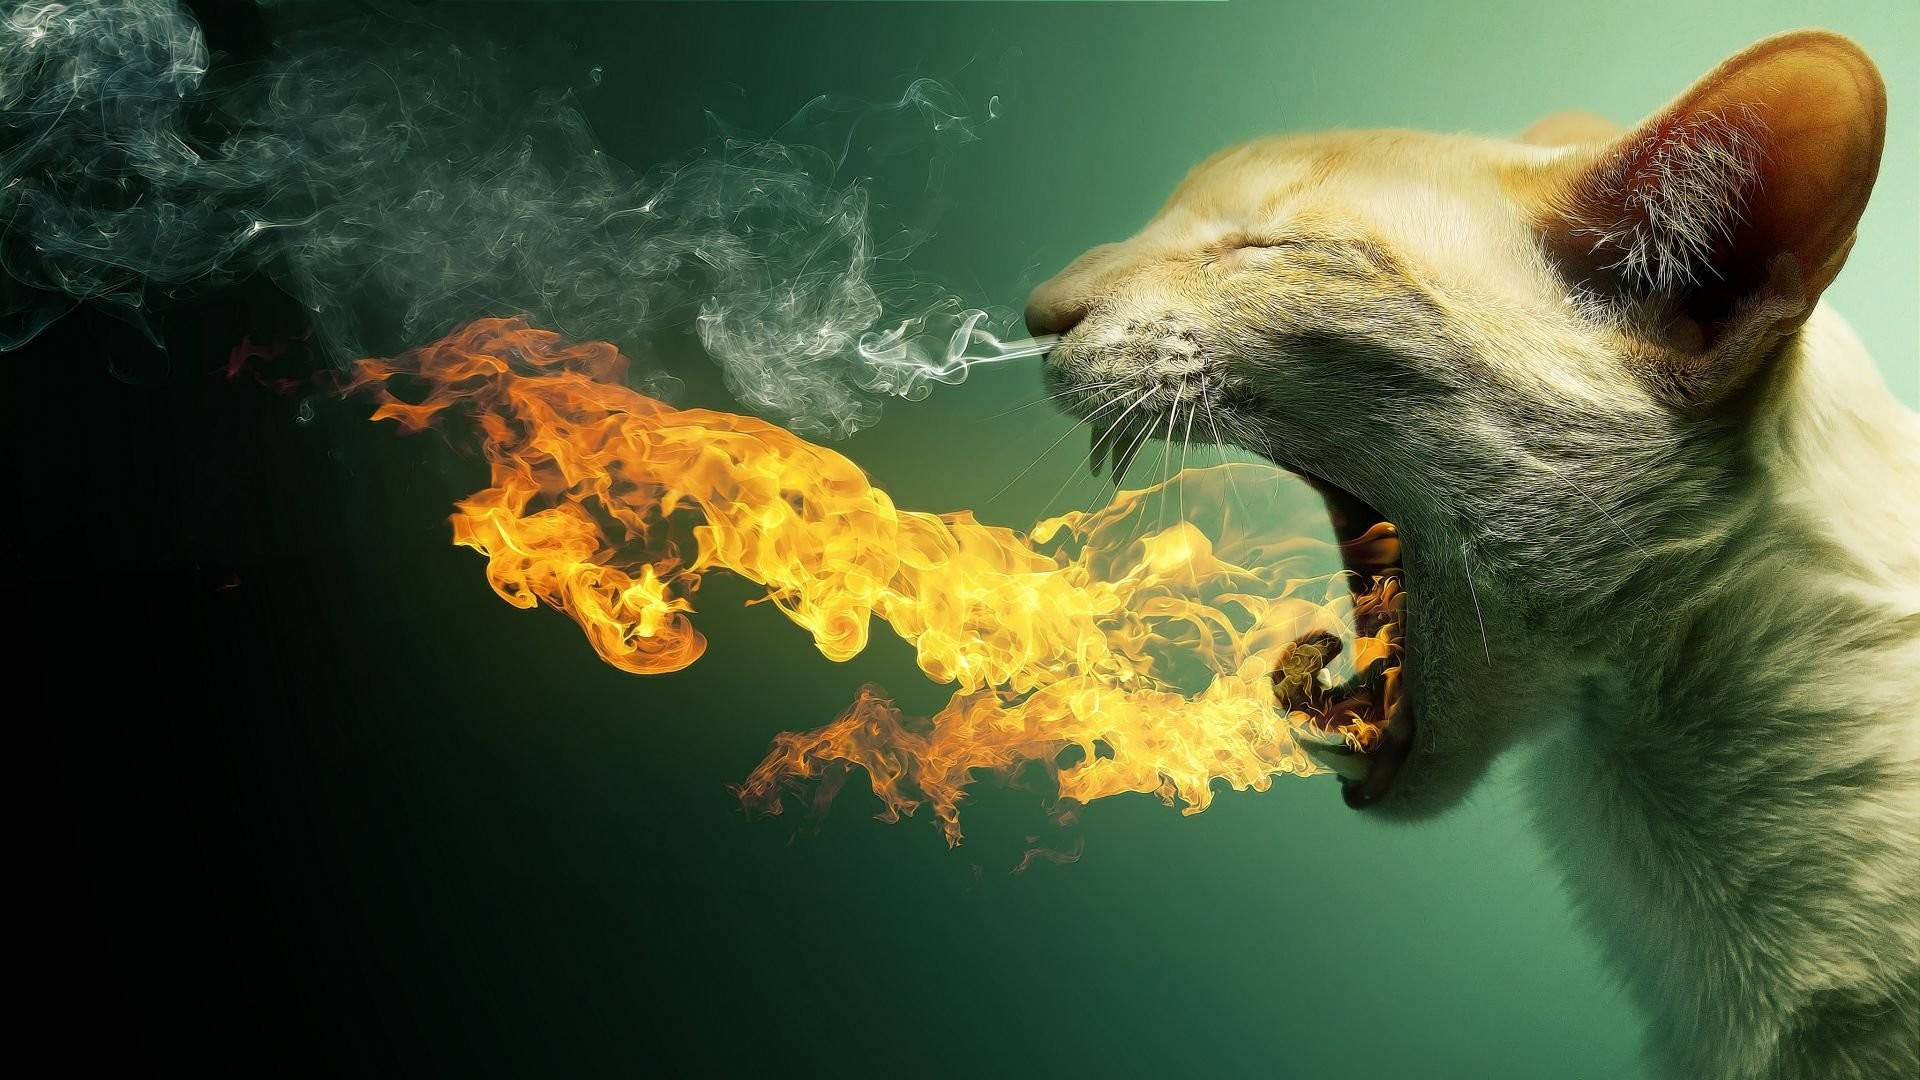 Surreal Fire Cat in a Mystical Realm Wallpaper